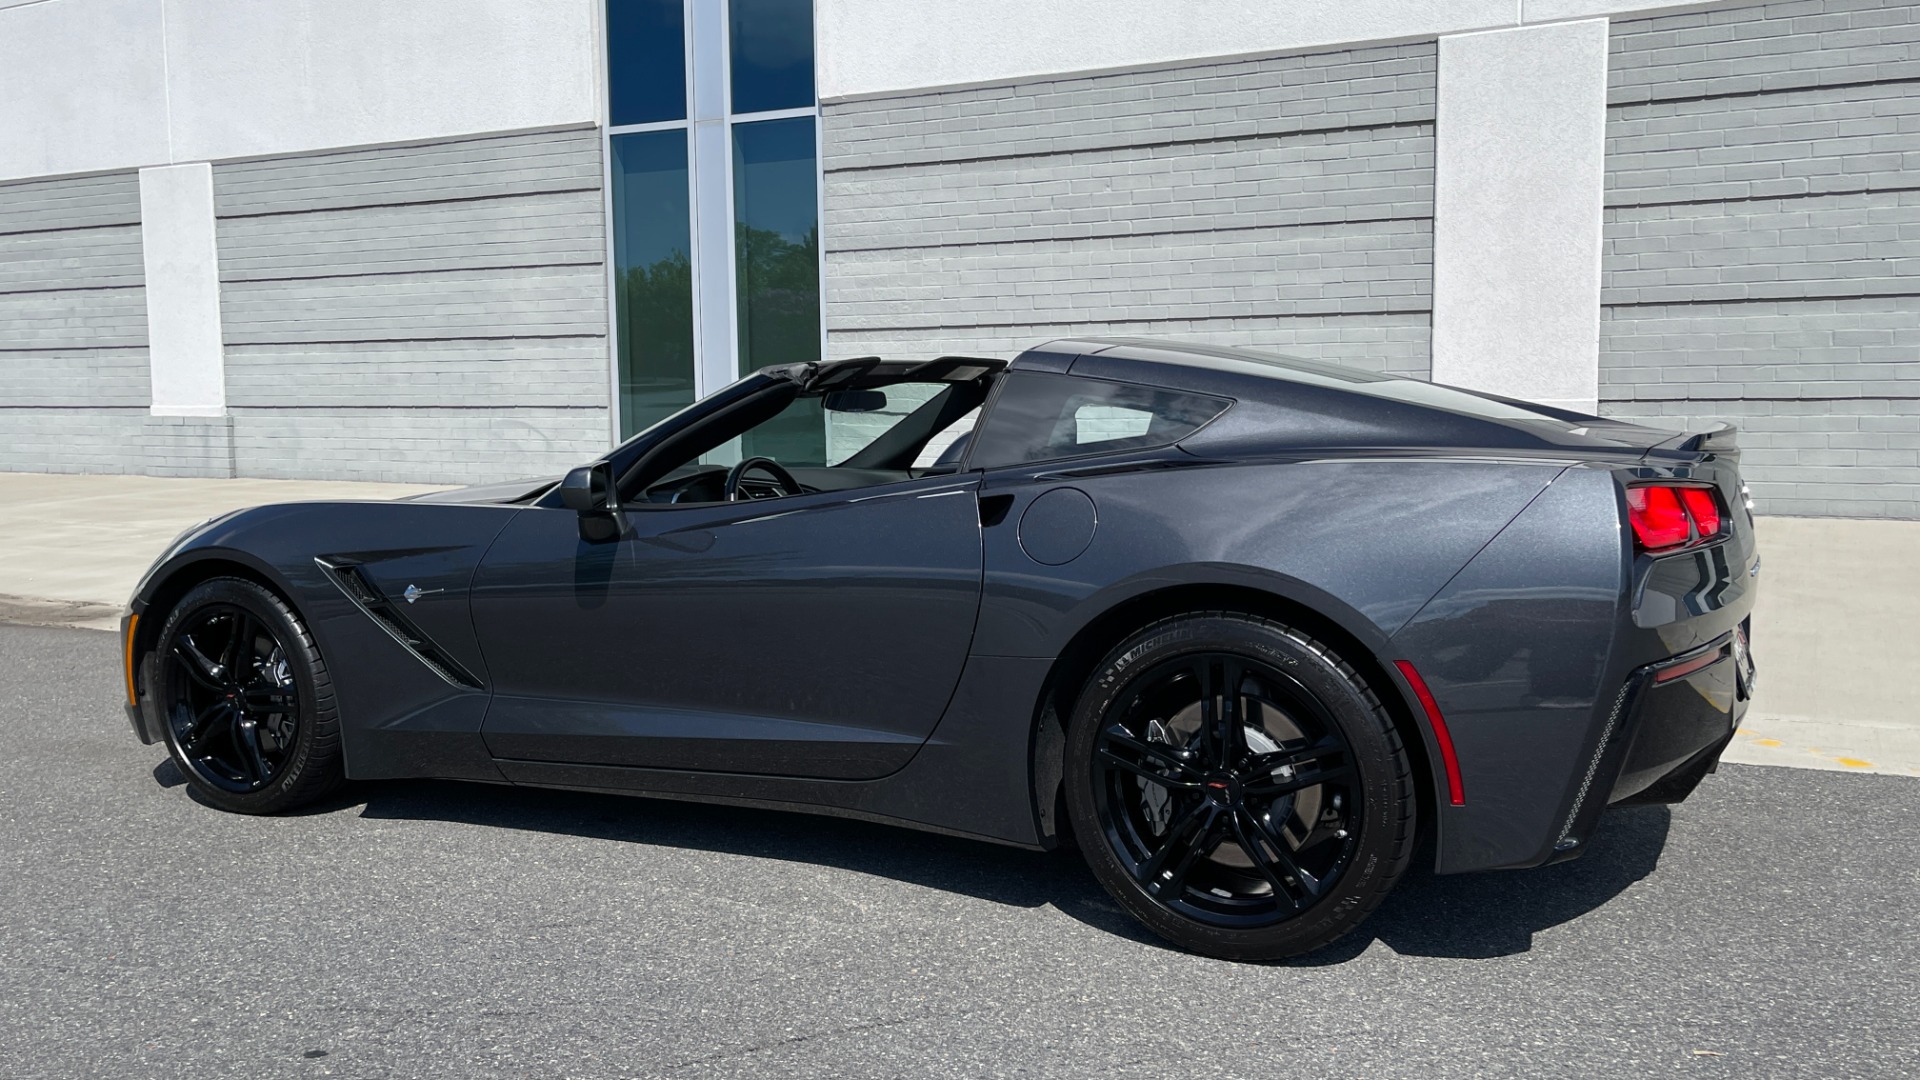 Used 2017 Chevrolet Corvette 1LT / 8SPD AUTO / 6.2L V8 / REMOTE START / PADDLE SHIFTERS for sale $52,995 at Formula Imports in Charlotte NC 28227 48